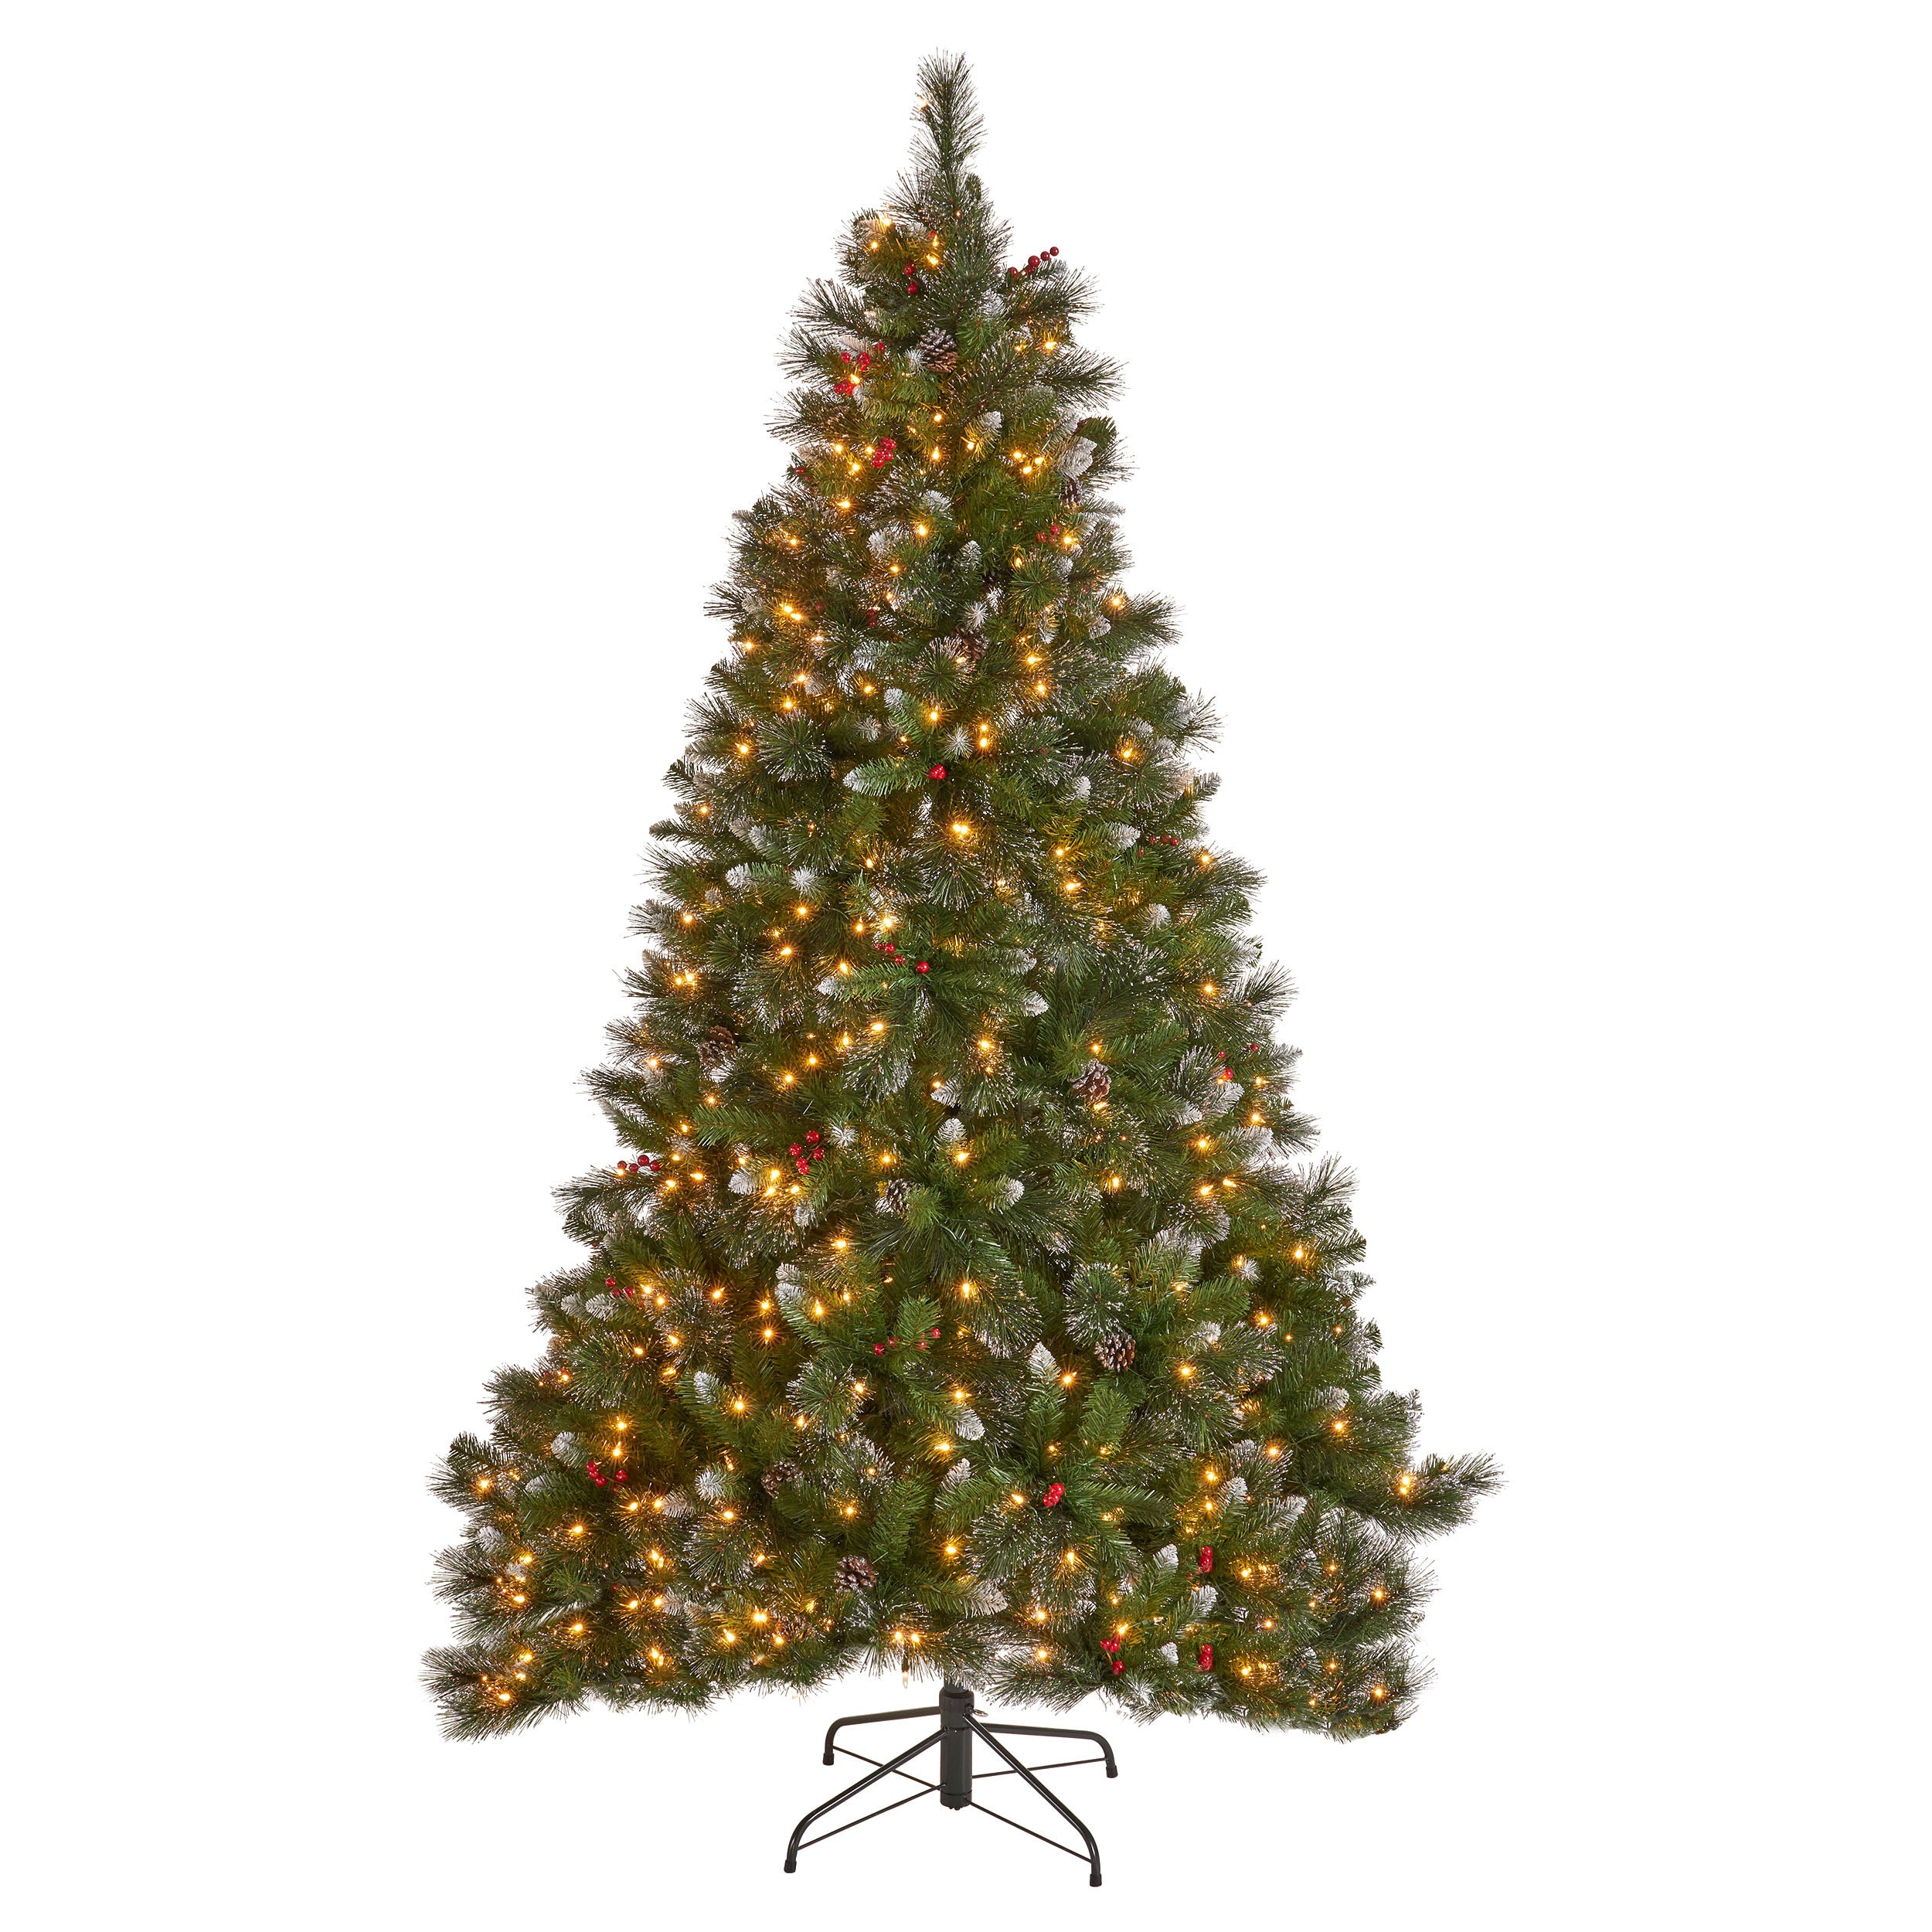 7 foot Mixed Spruce Hinged Artificial Christmas Tree with Glitter Branches Red Berries and Pinecones Clear Lights